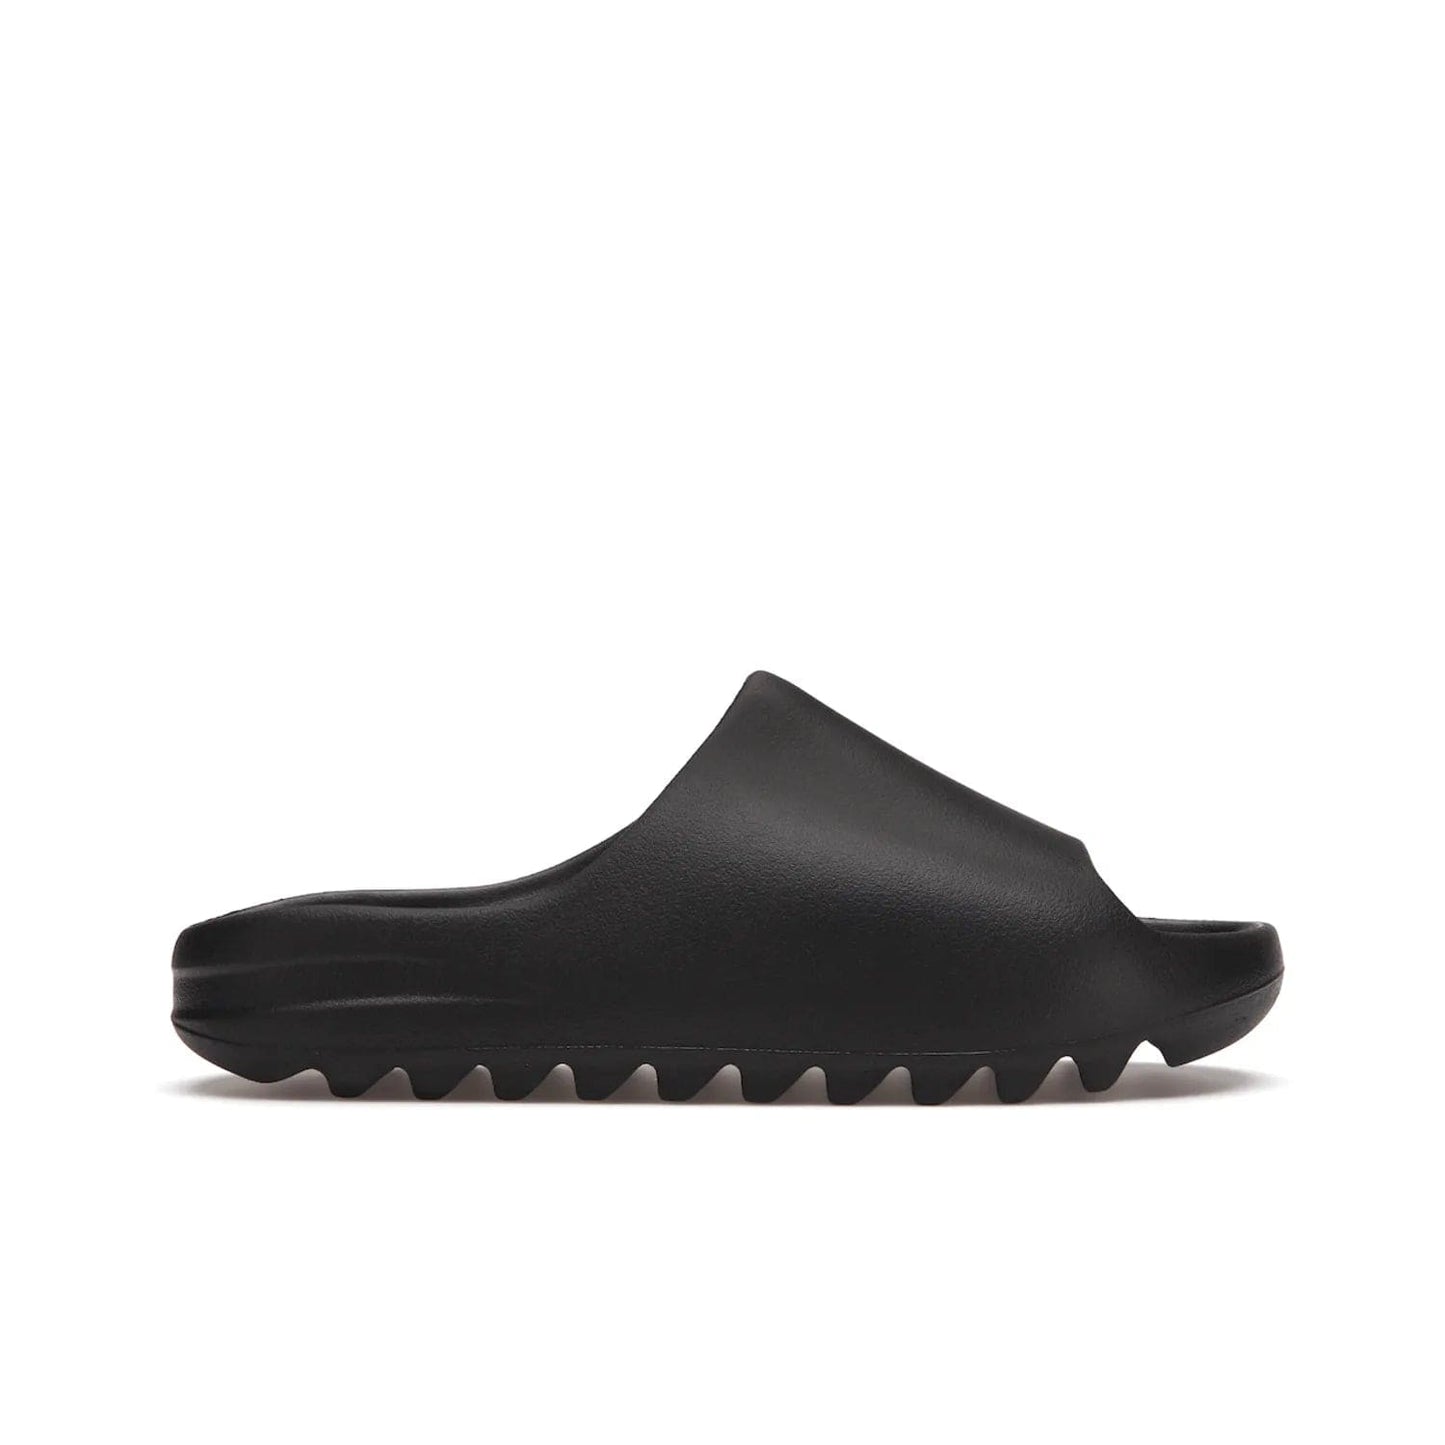 adidas Yeezy Slide Onyx - Image 1 - Only at www.BallersClubKickz.com - Step into comfort and style with the adidas Yeezy Slide Onyx. Featuring foam construction, an all-black colorway and a grooved outsole for stability and responsiveness, this versatile slide is a must-have for your collection.